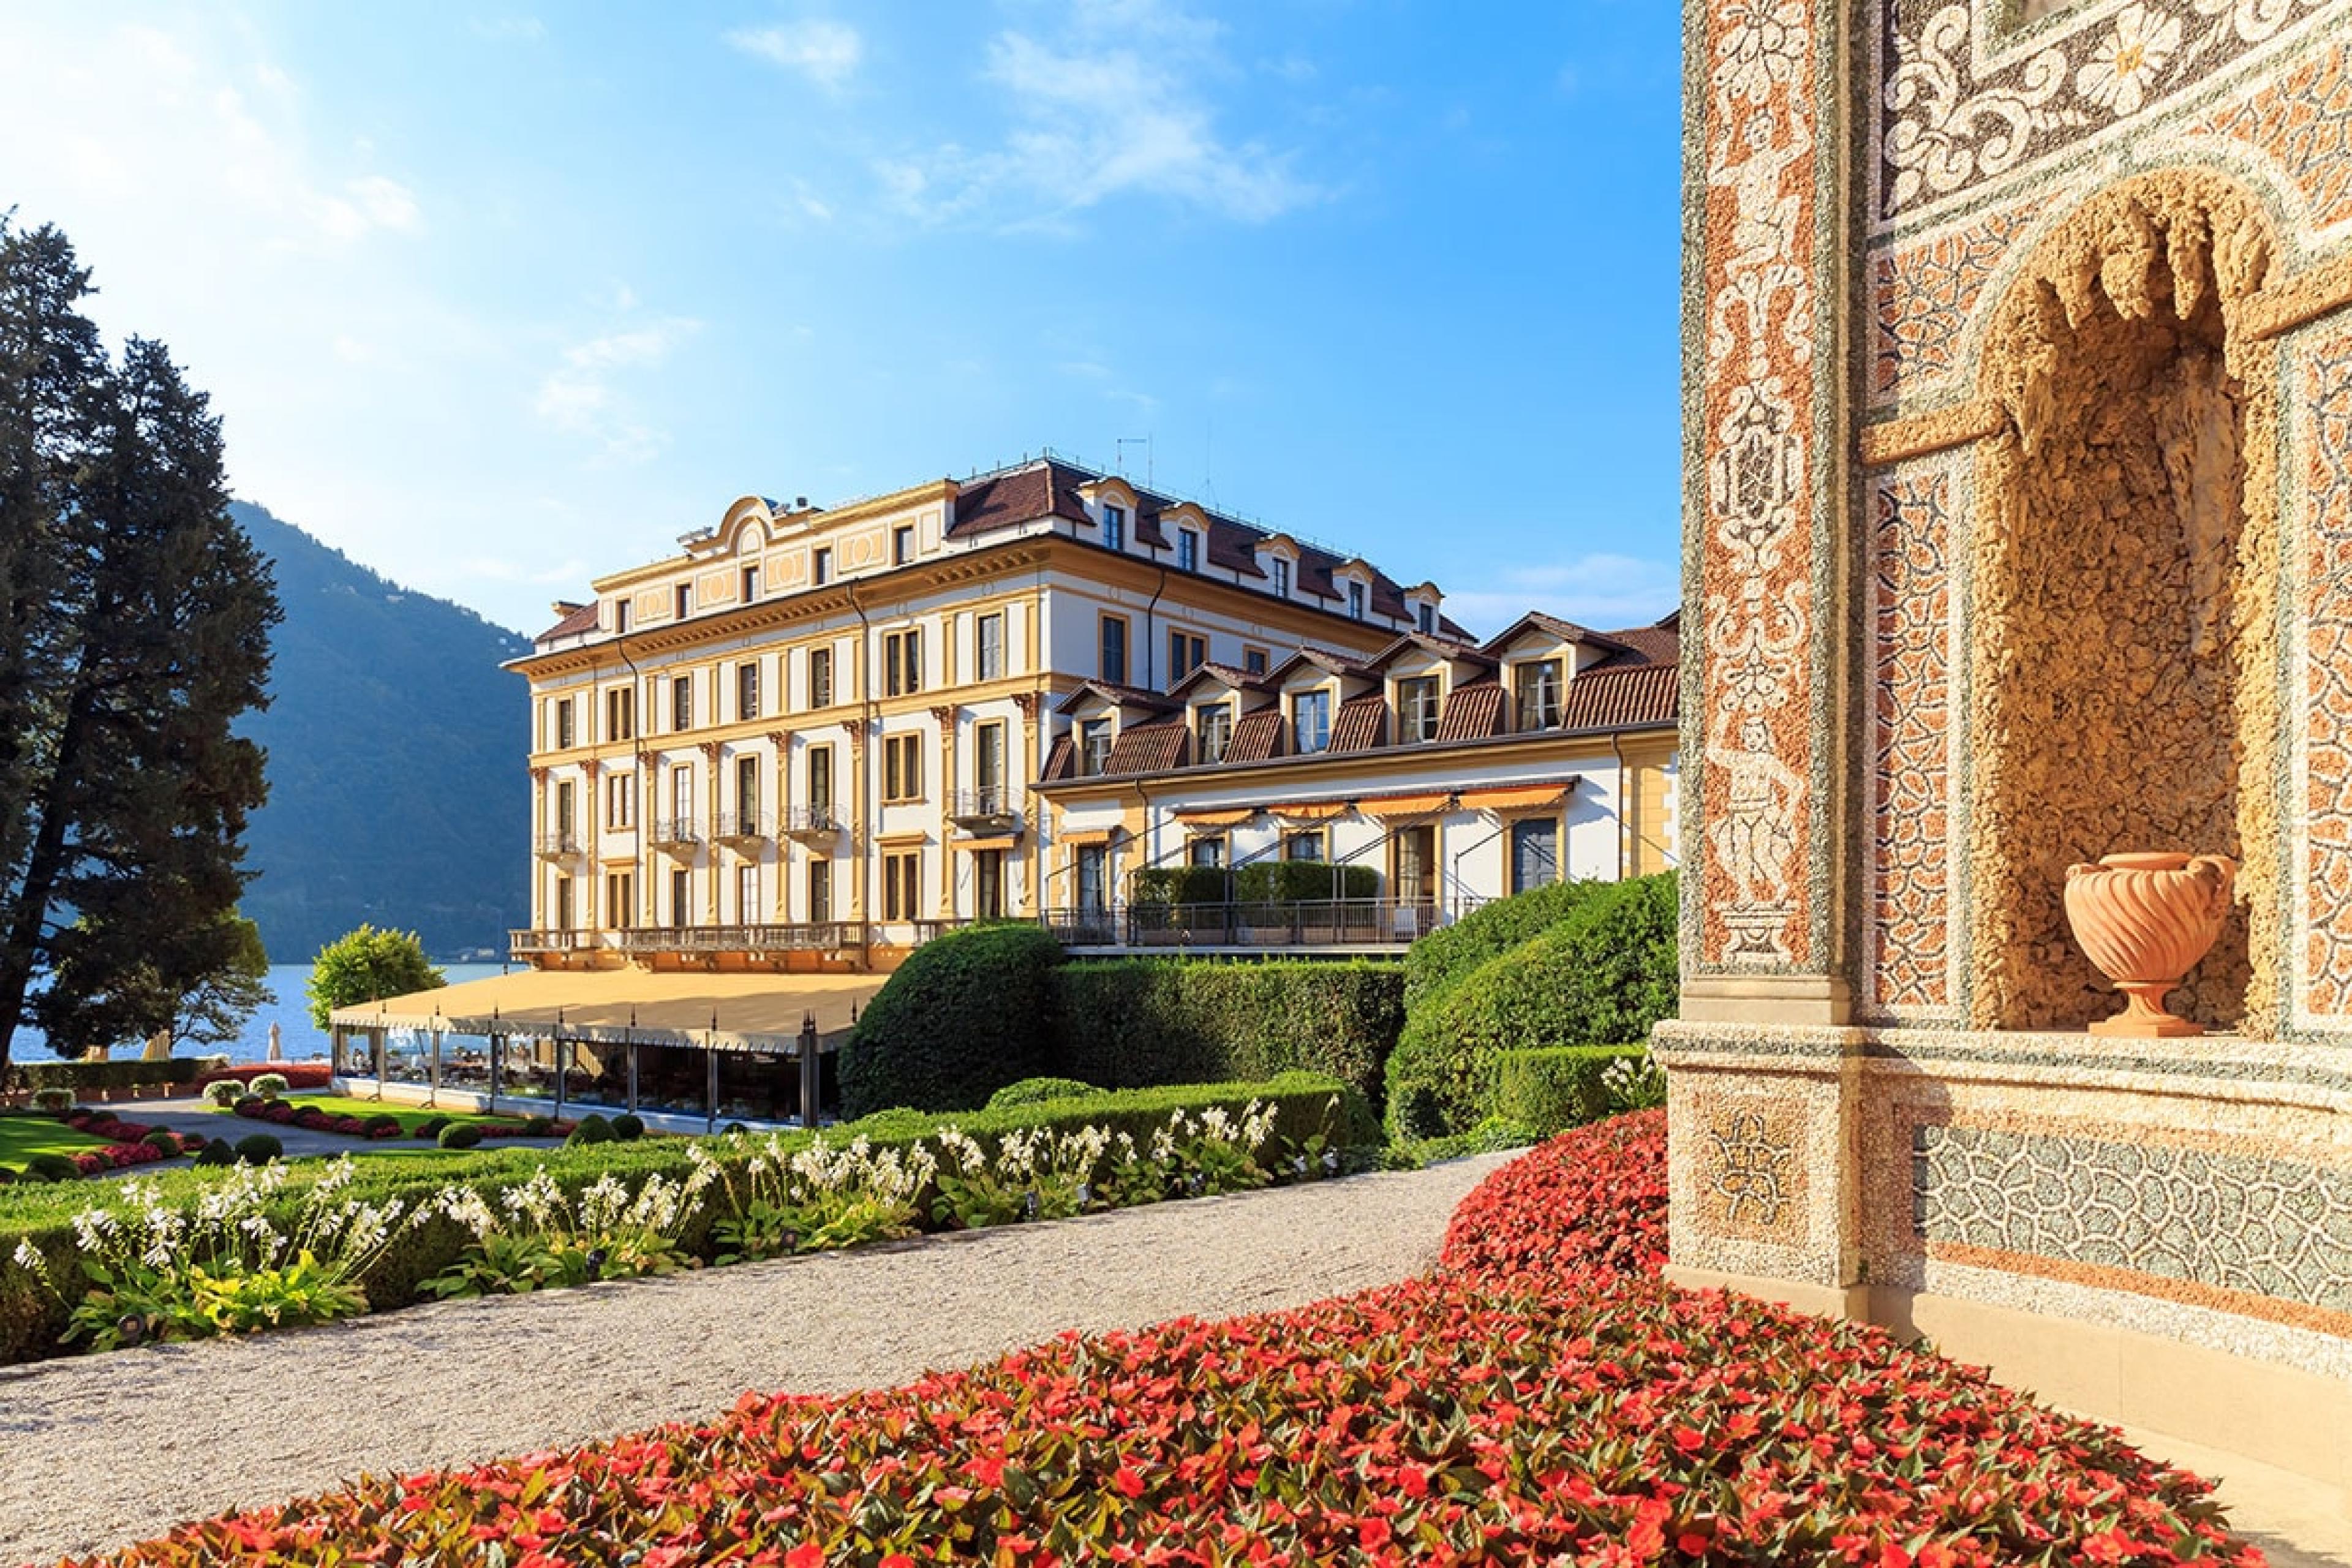 grand italian hotel on Lake Como with gold-painted trim on windows